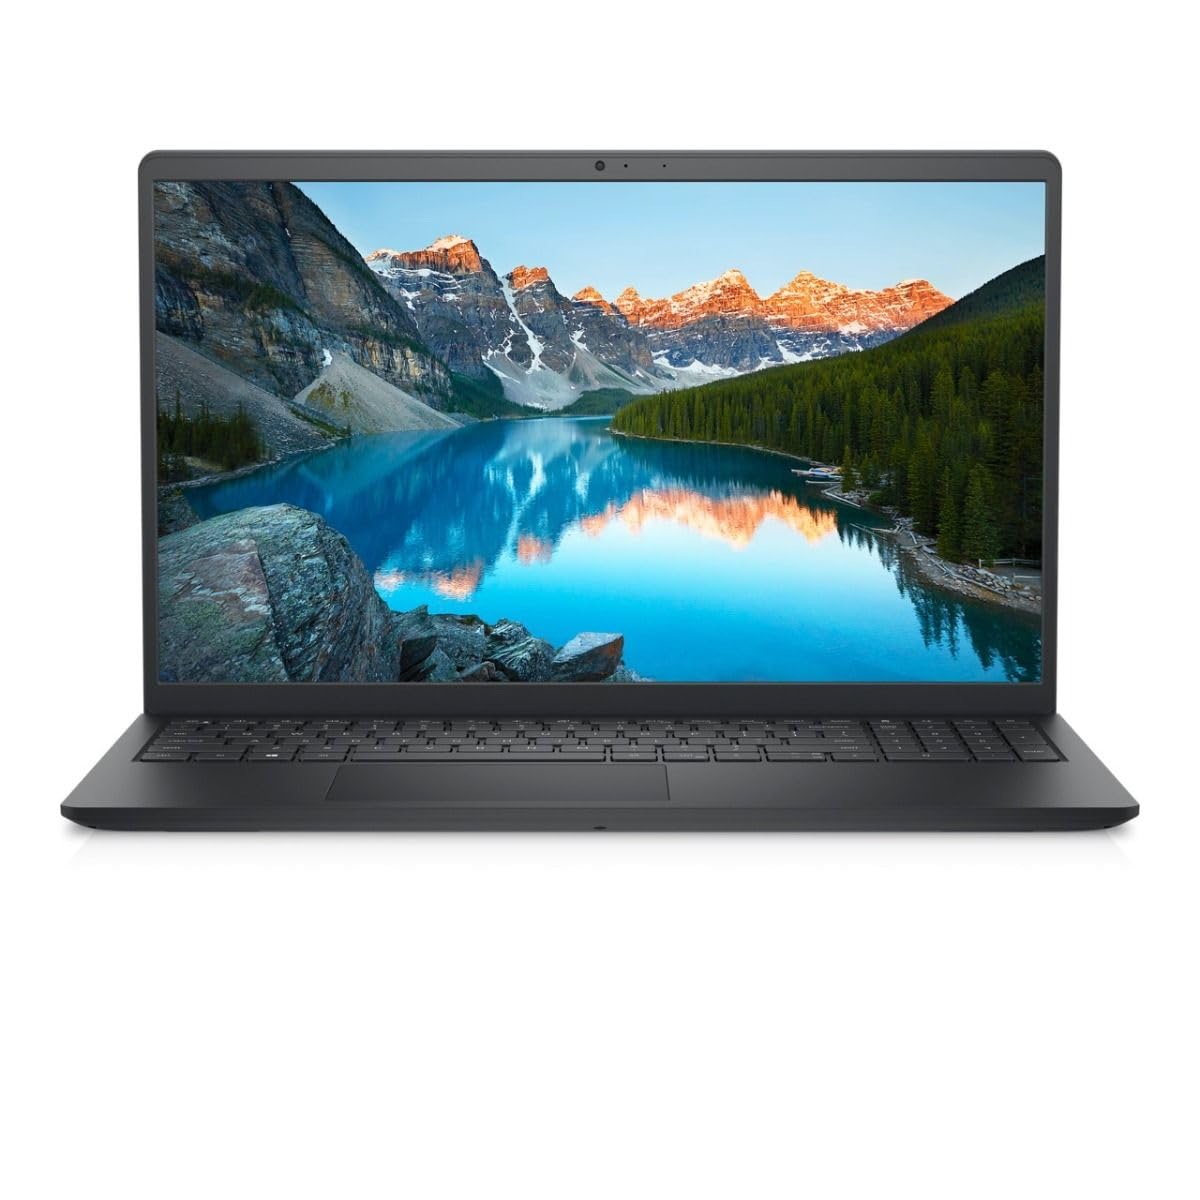 Dell Inspiron 15 3000 3530 Business Laptop | 15.6